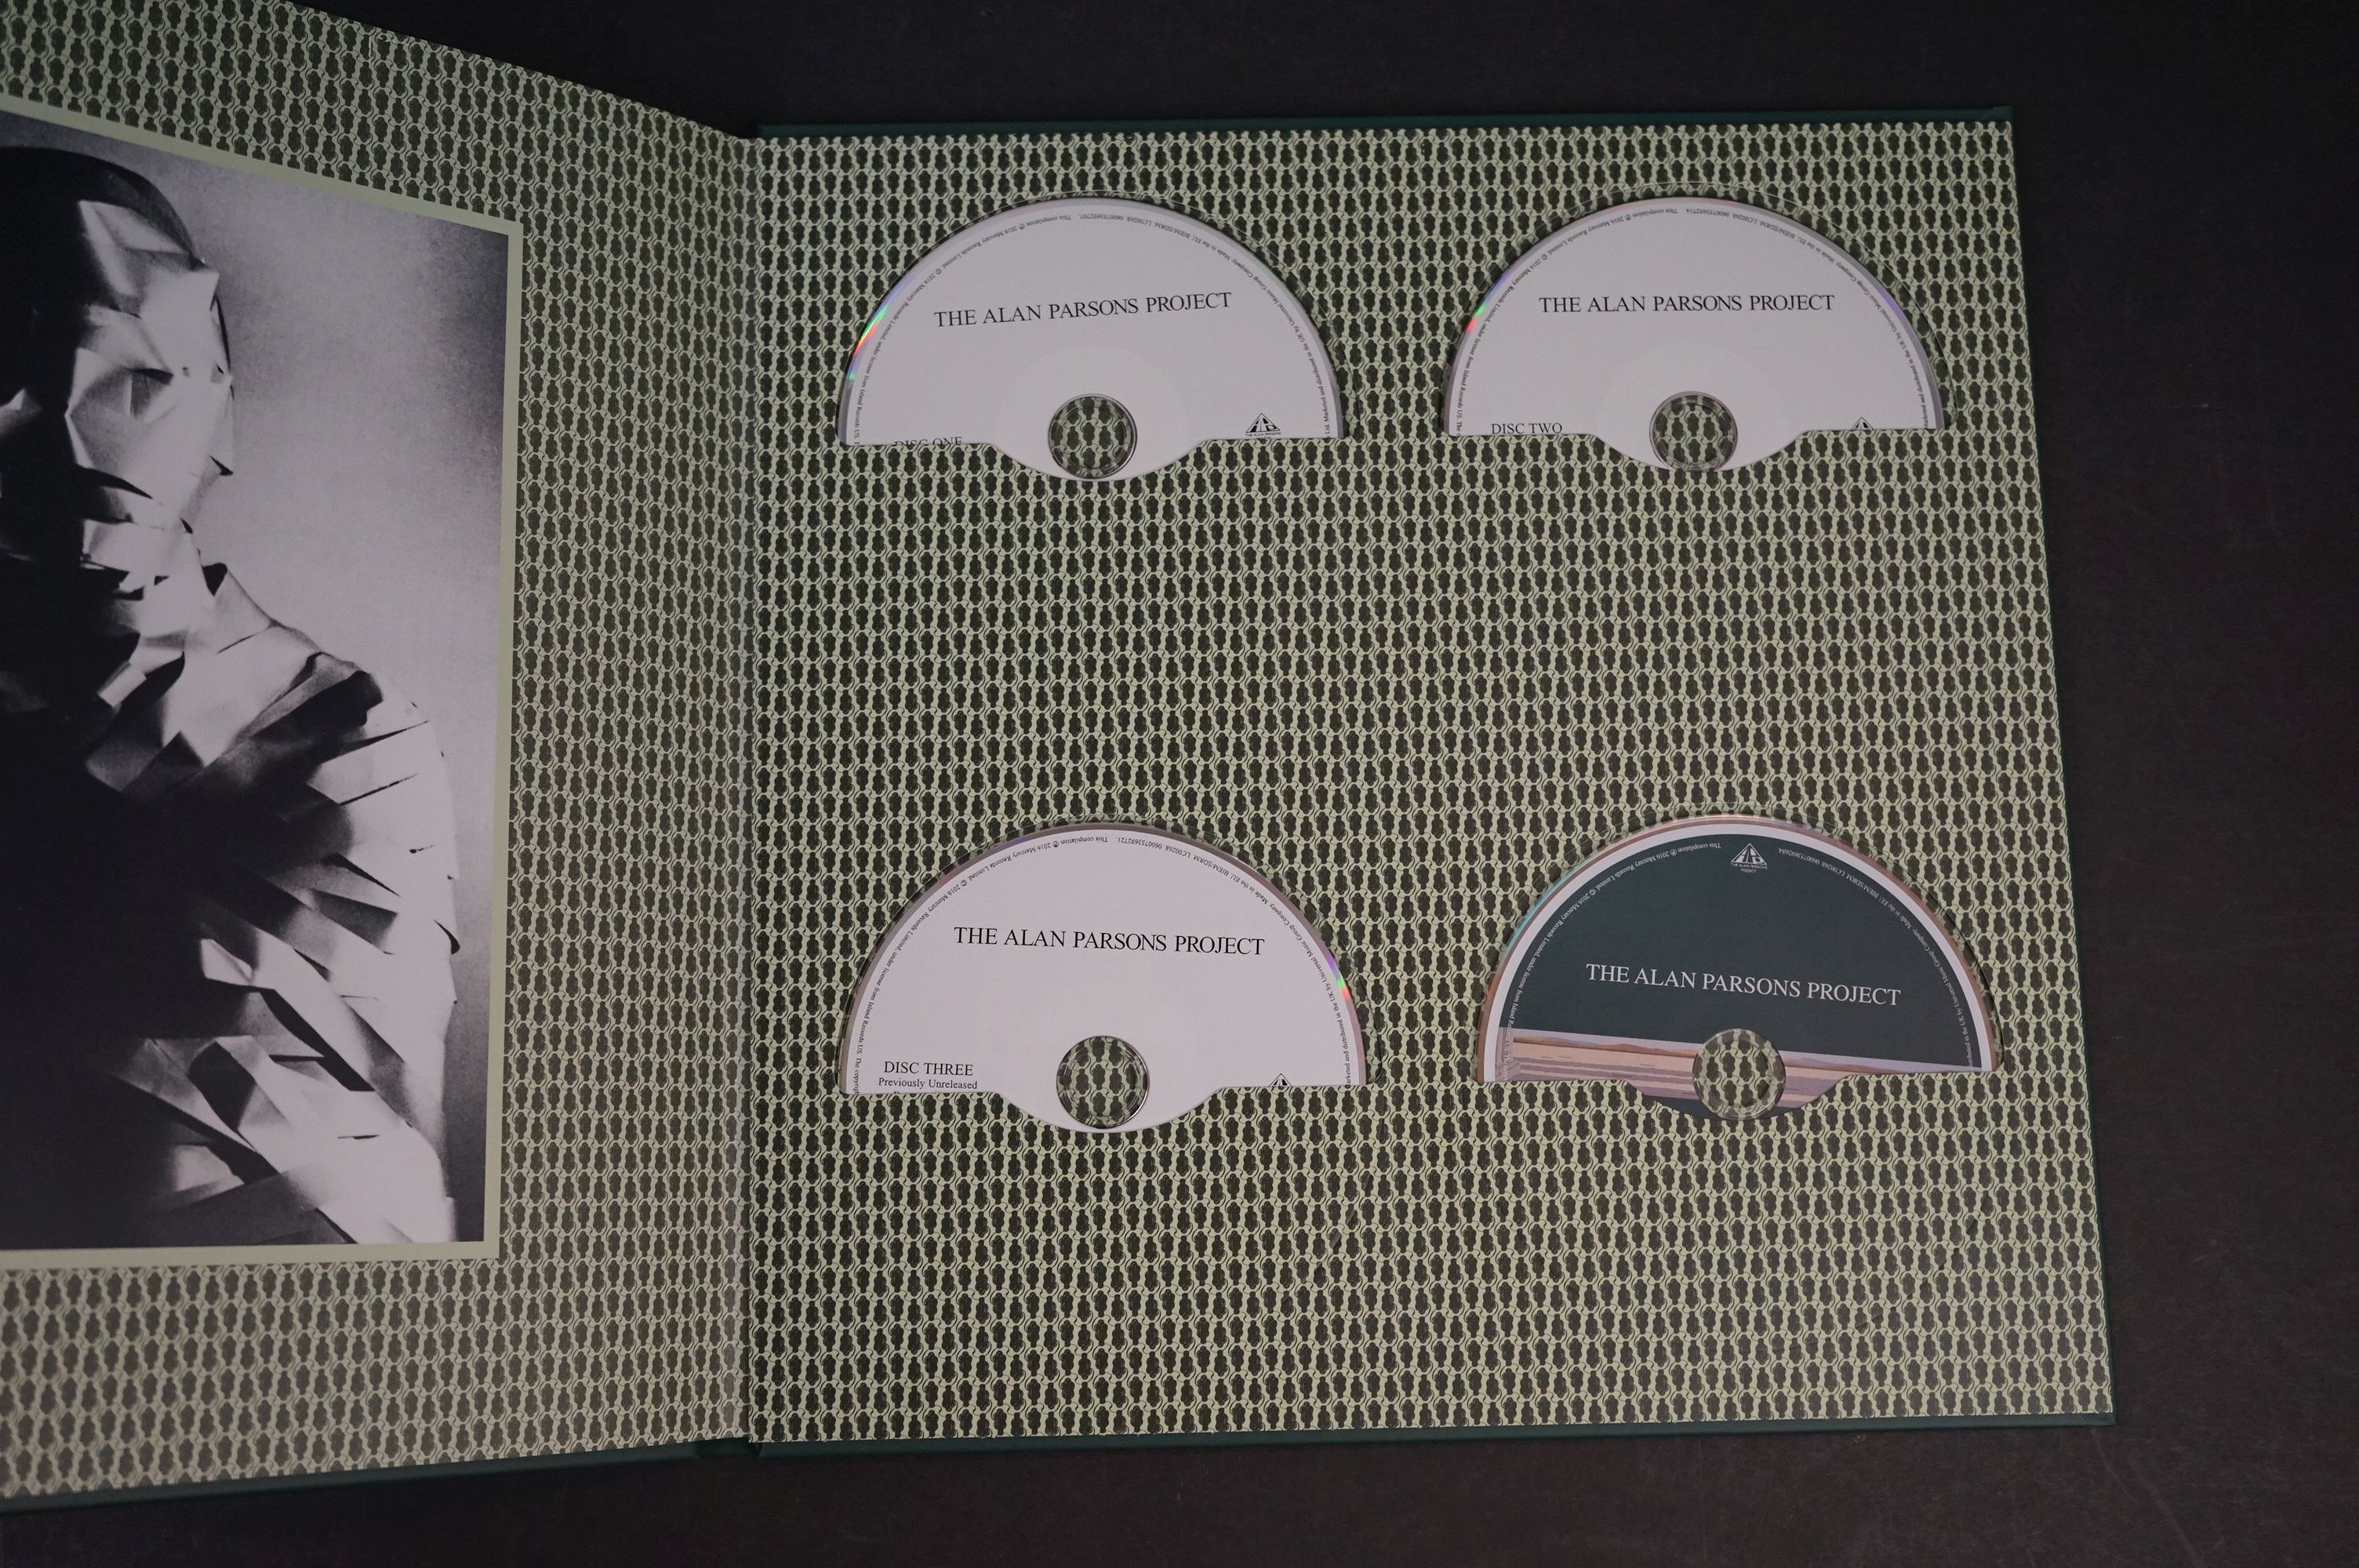 Vinyl / CD / Bluray DVD - The Alan Parsons Project Tales of Mystery and Imagination Edgar Allan - Image 6 of 13